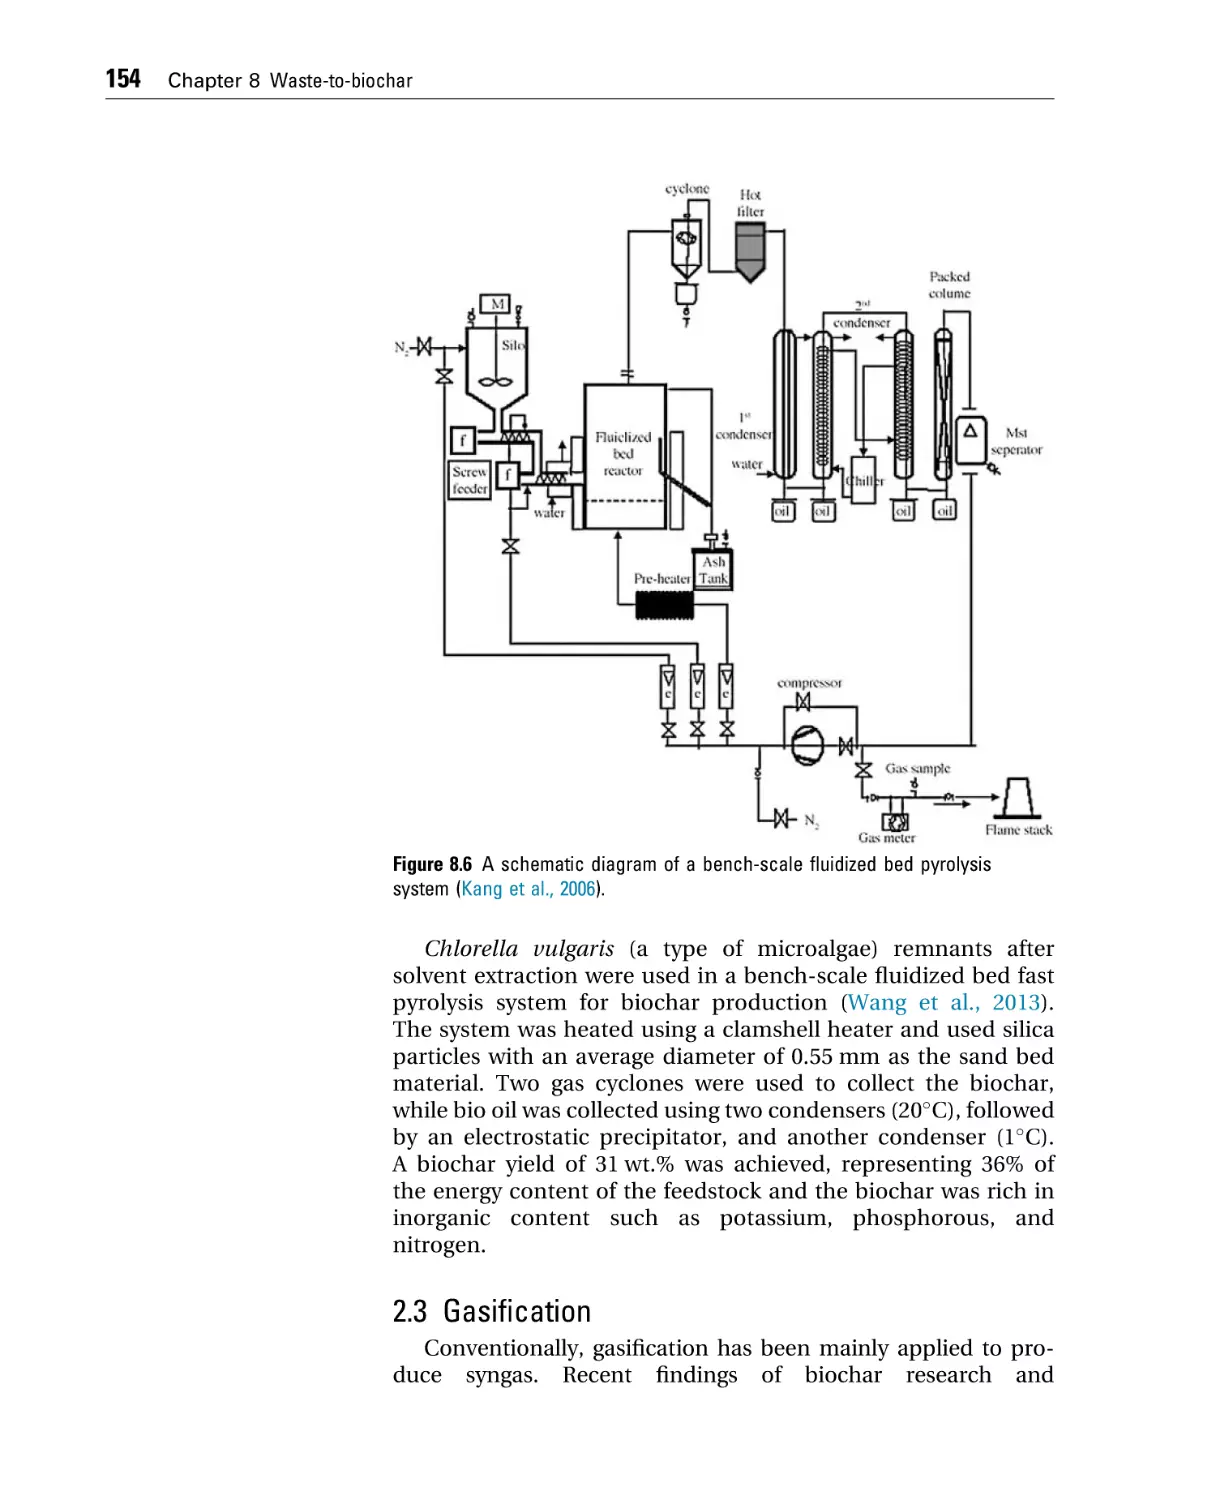 2.3 Gasification